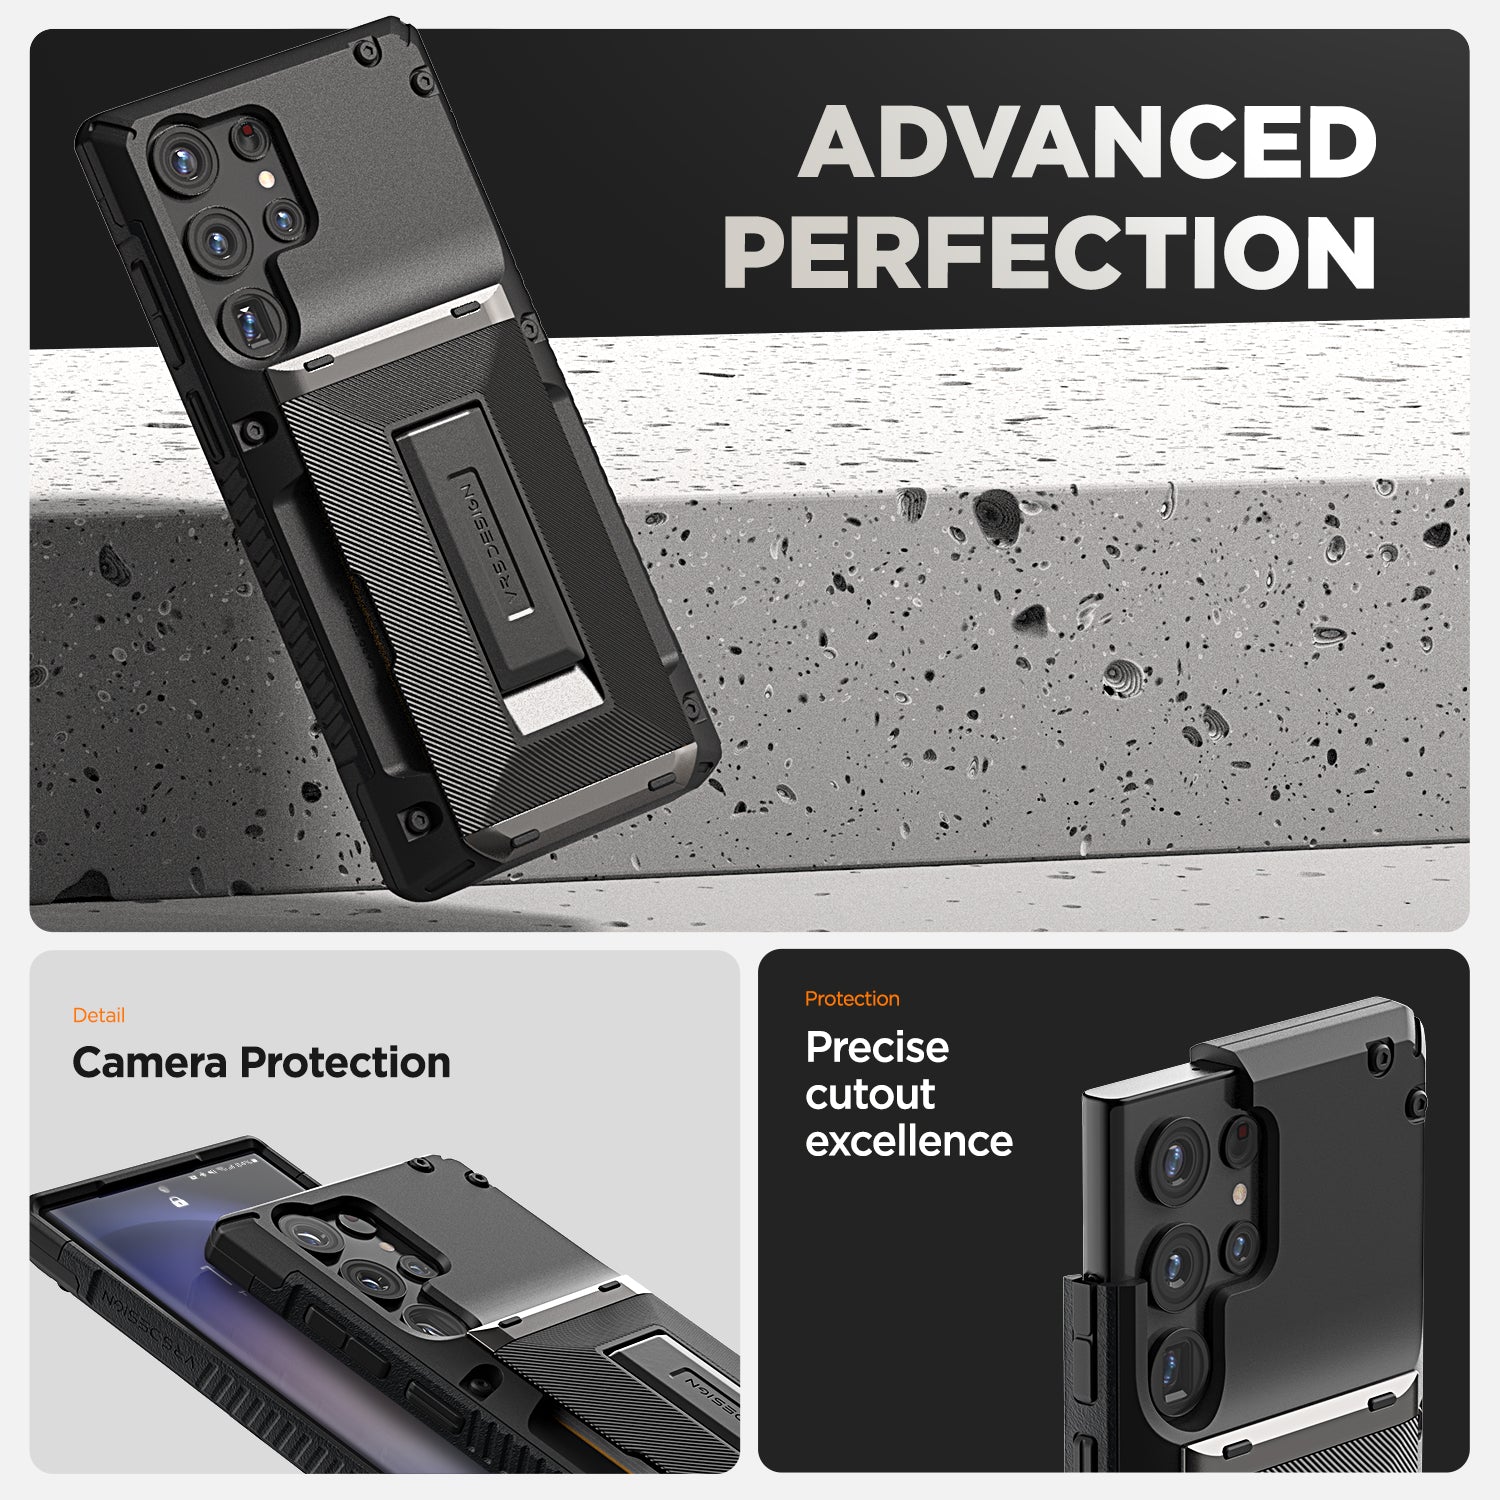 Samsung Galaxy S23 Ultra wallet rugged case with multiple durable and convenient card slot with sleek minimalism by VRS